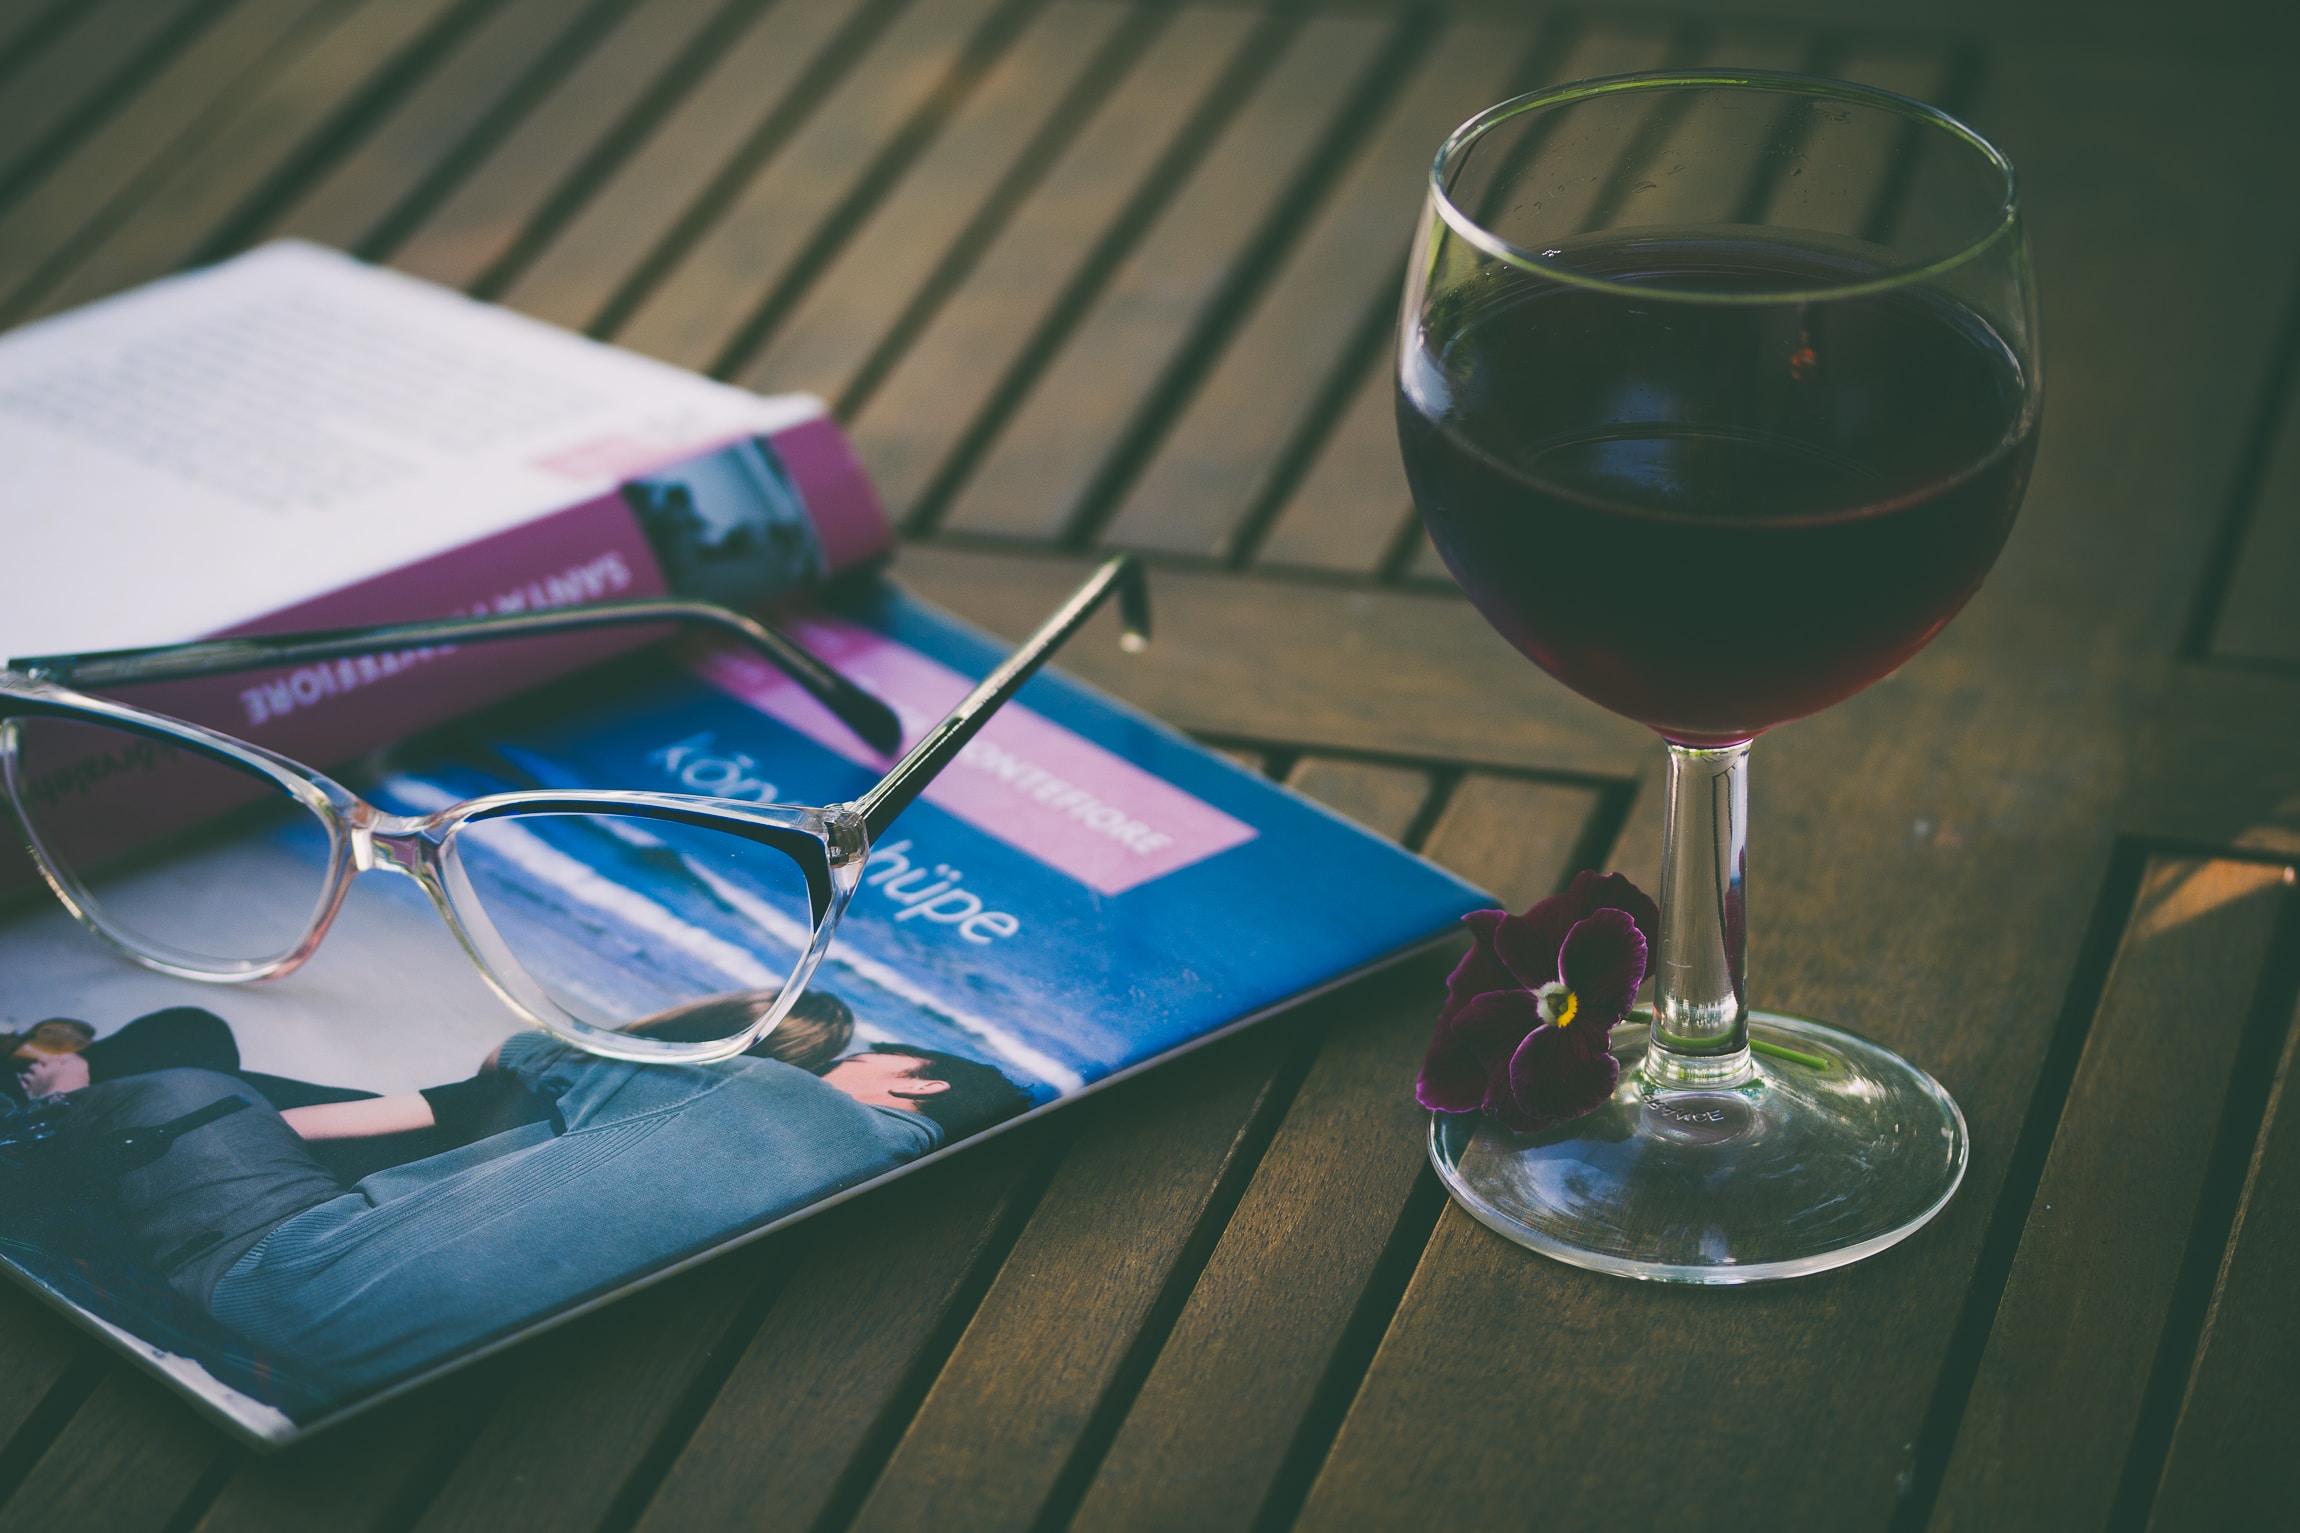 The best wine courses you can attend to study wine. In the image, you can see a book and a pair of glasses, with a glass of red wine, on a brown desk.